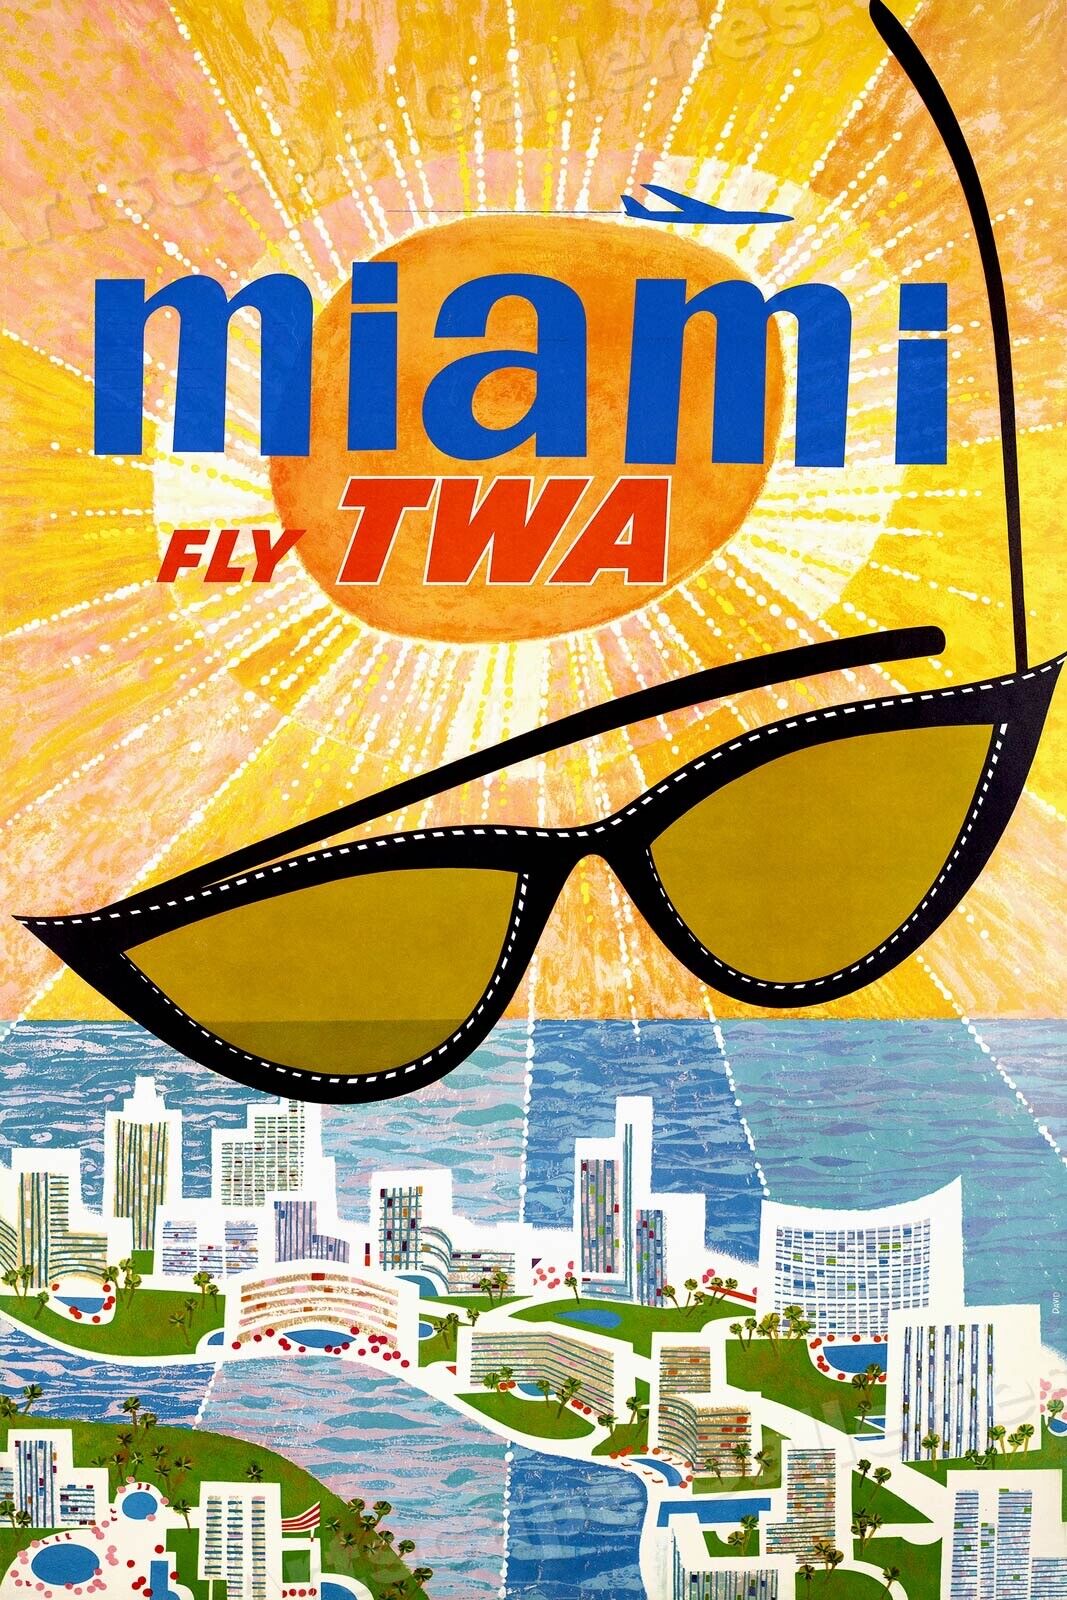 1960s “MIami TWA” Vintage Style Airline Travel Poster - 24x36